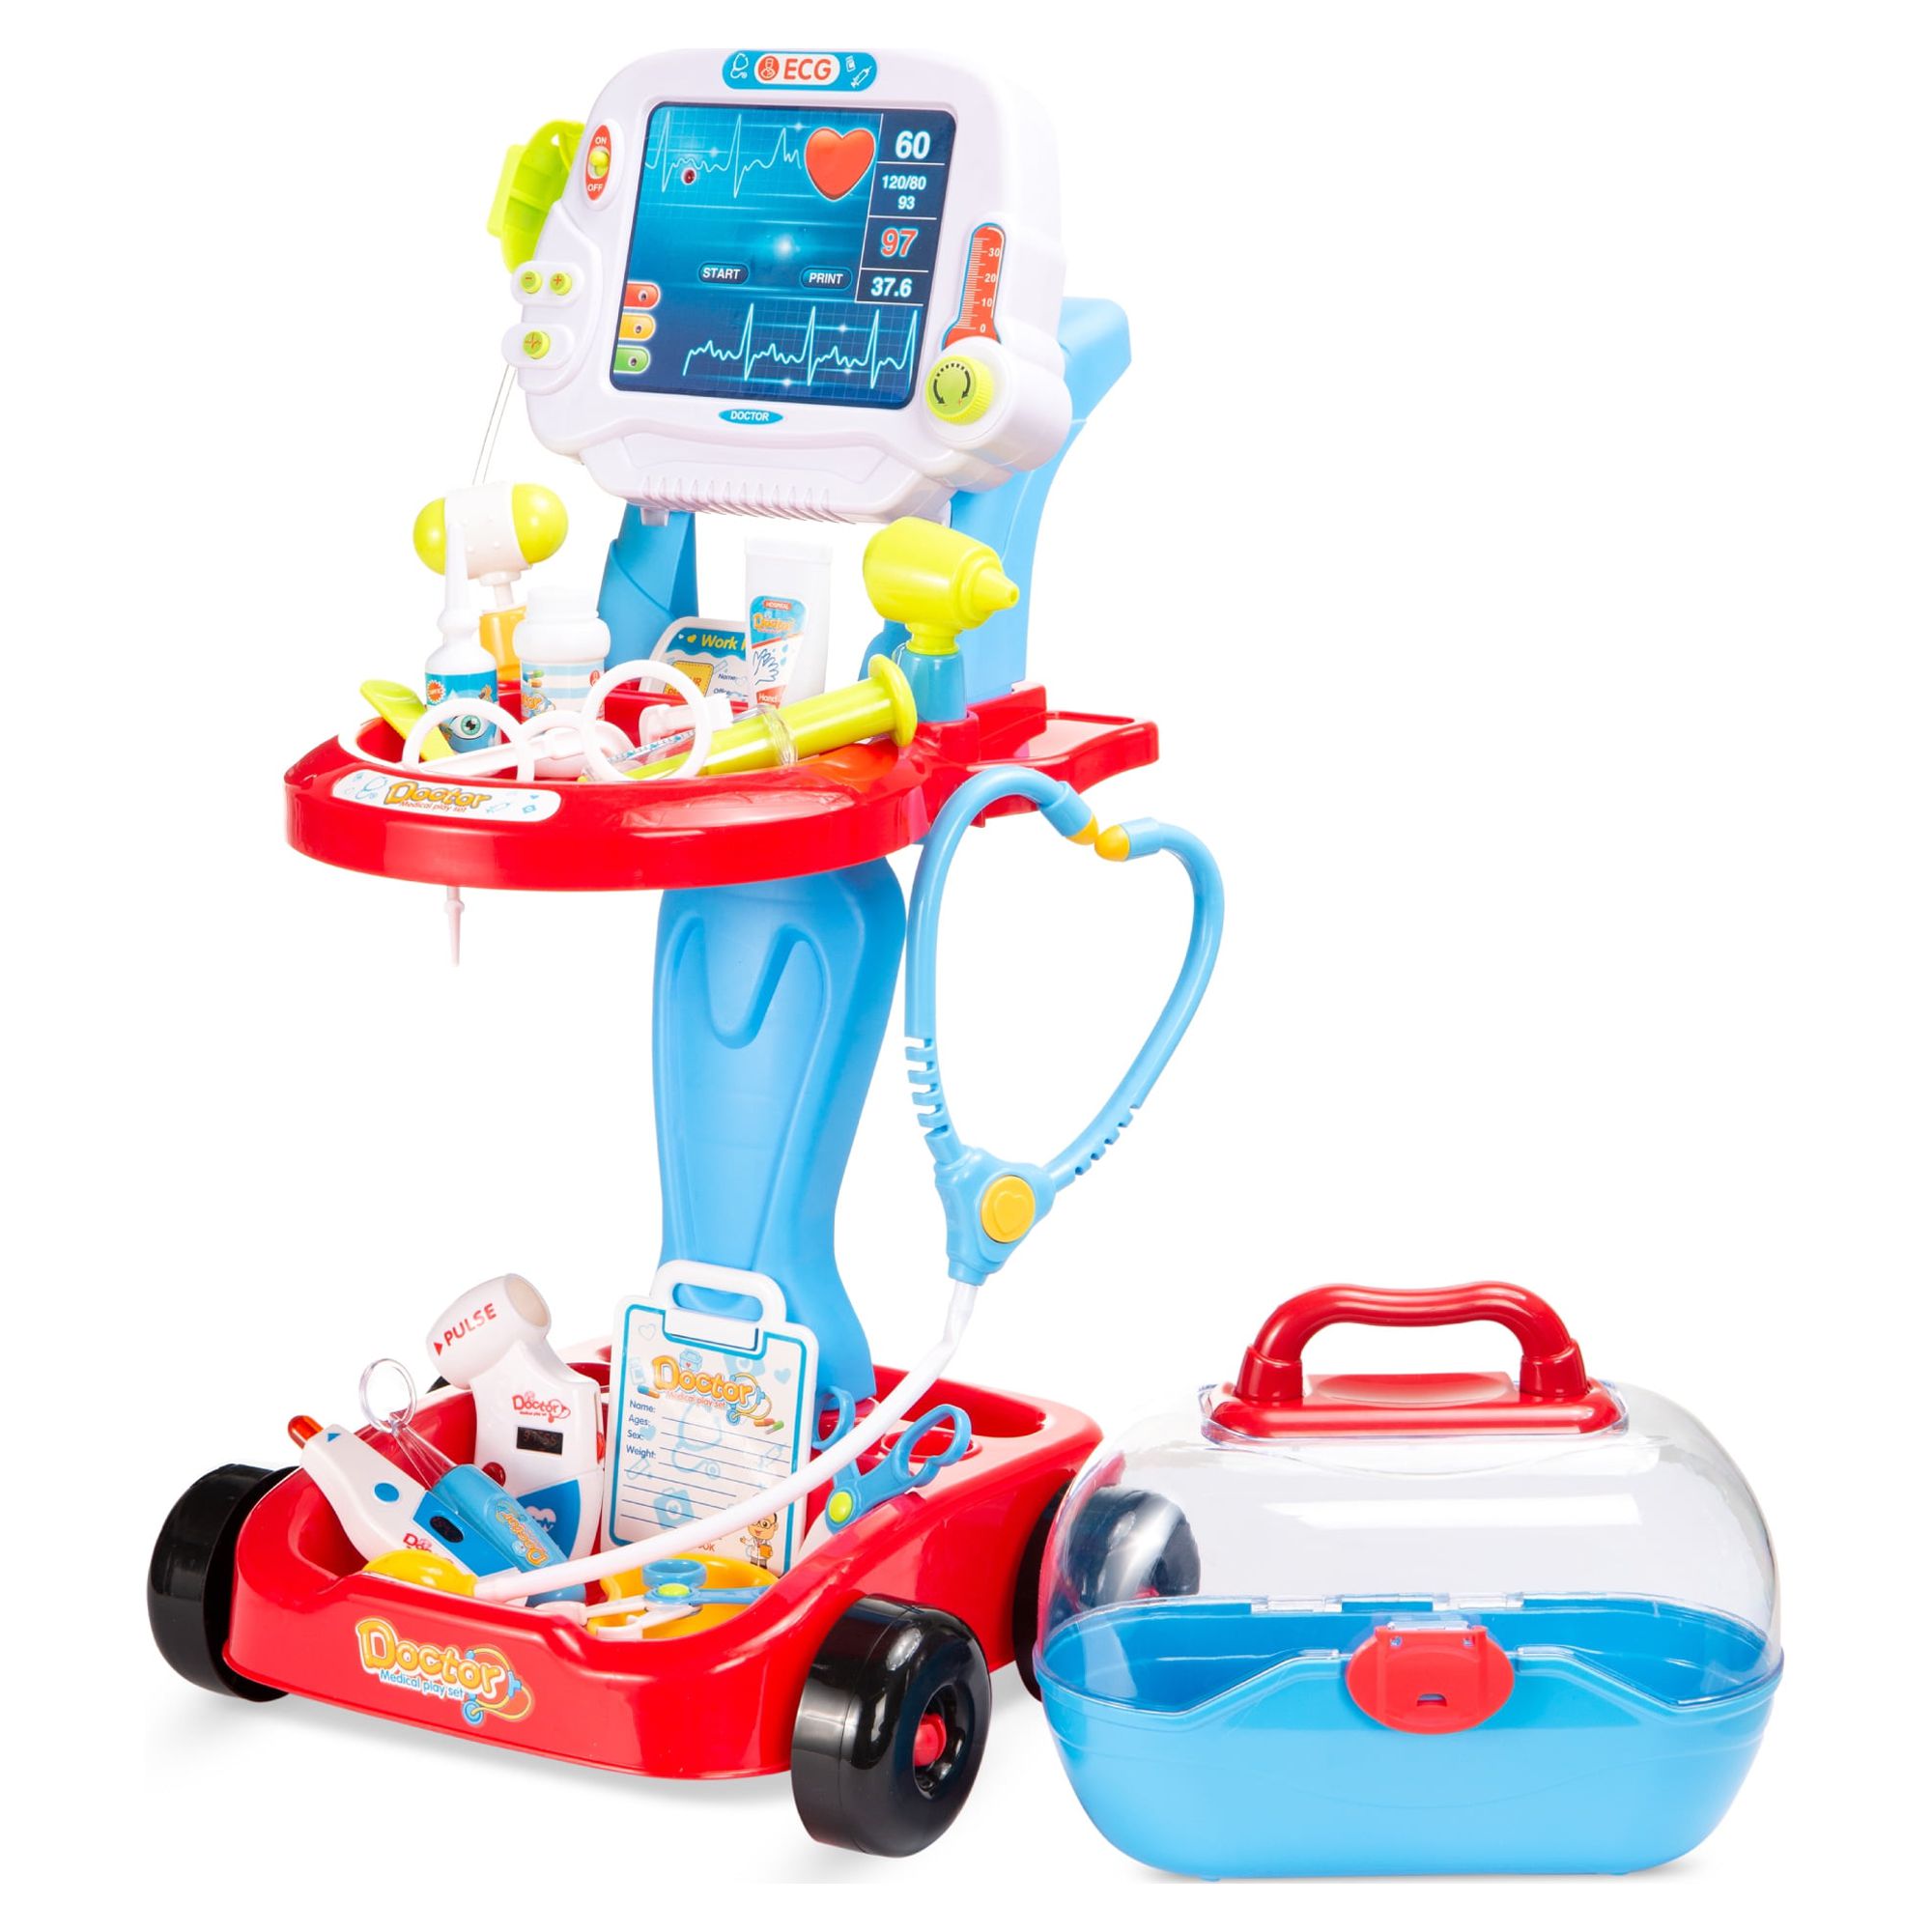 Best Choice Products Play Doctor Kit for Kids, Pretend Medical Station Set with Carrying Case, Mobile Cart - Blue - image 1 of 7